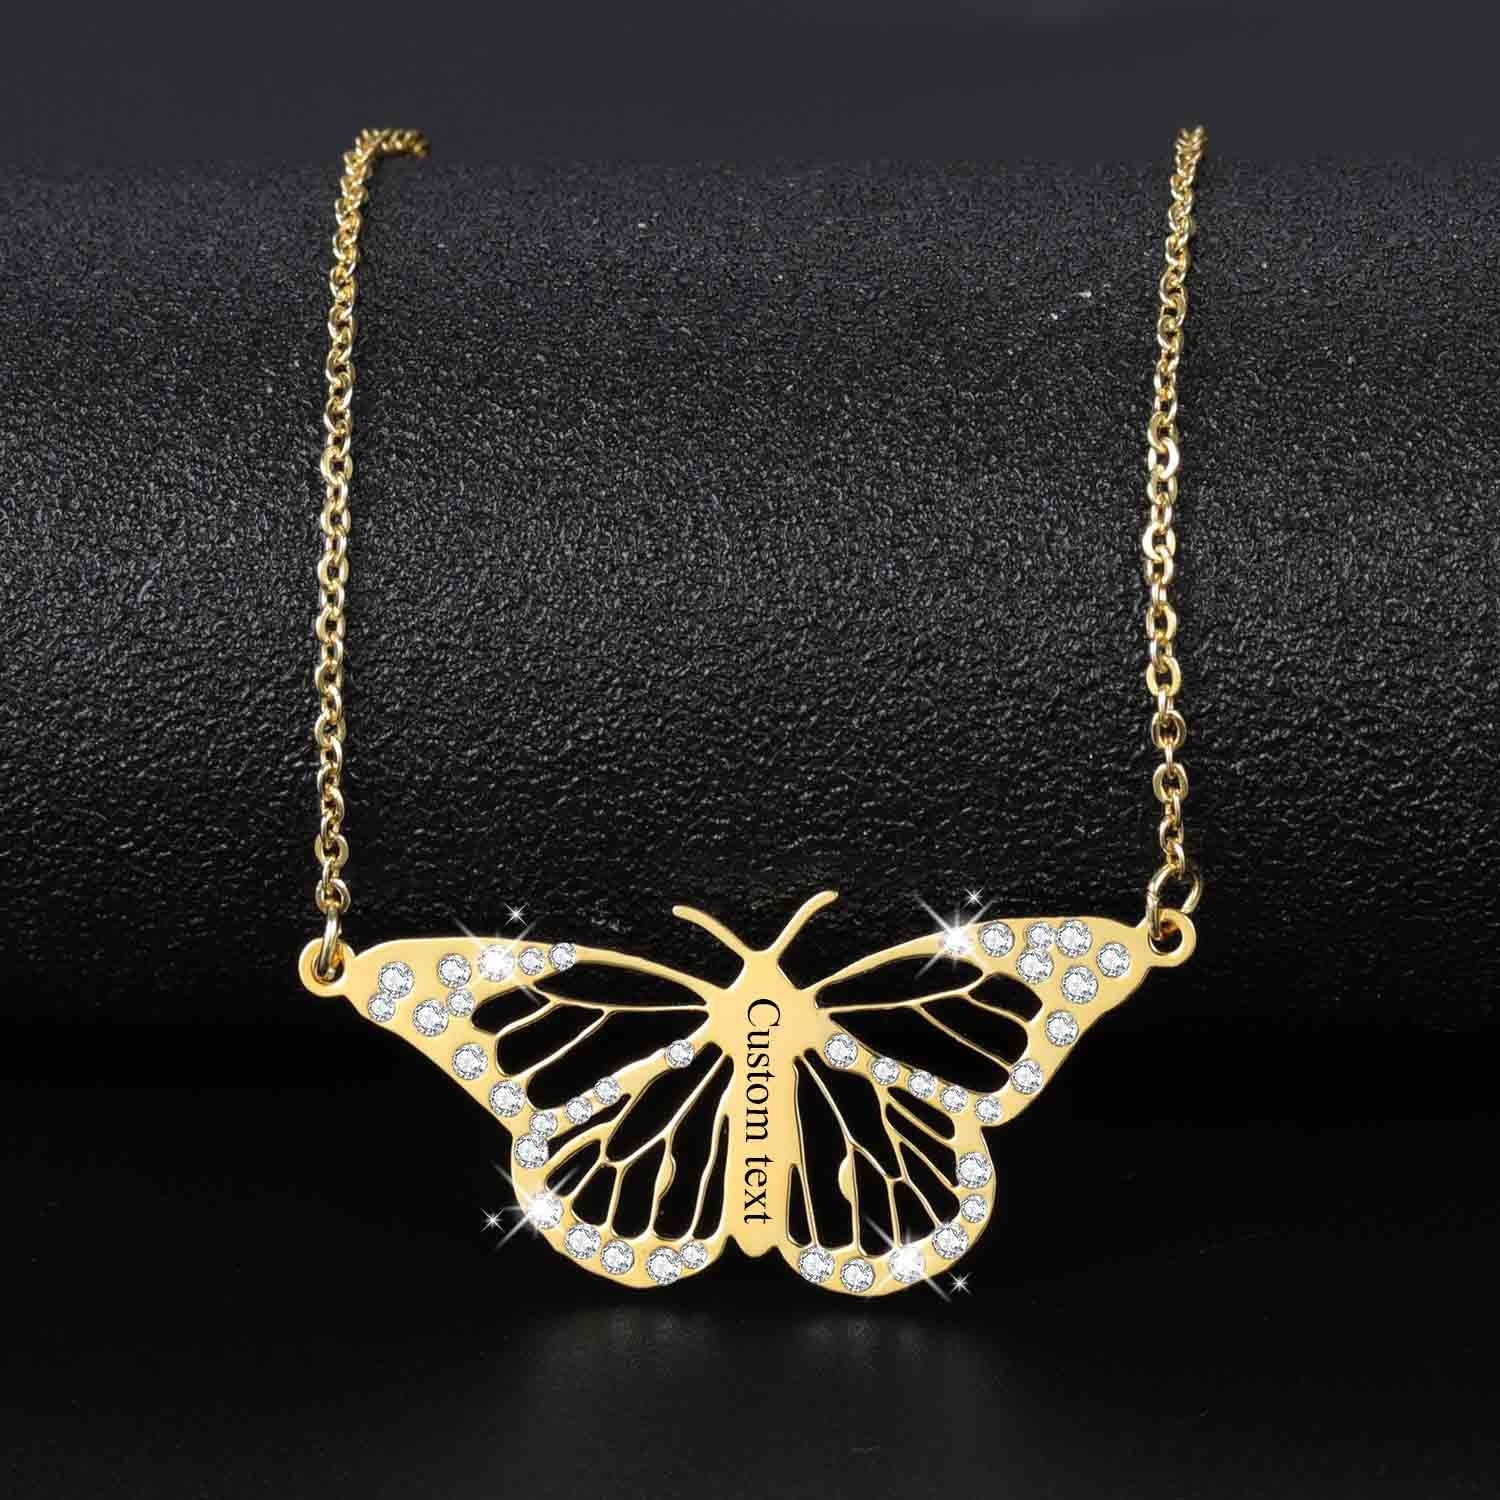 Personalized Blinged Butterfly Necklace